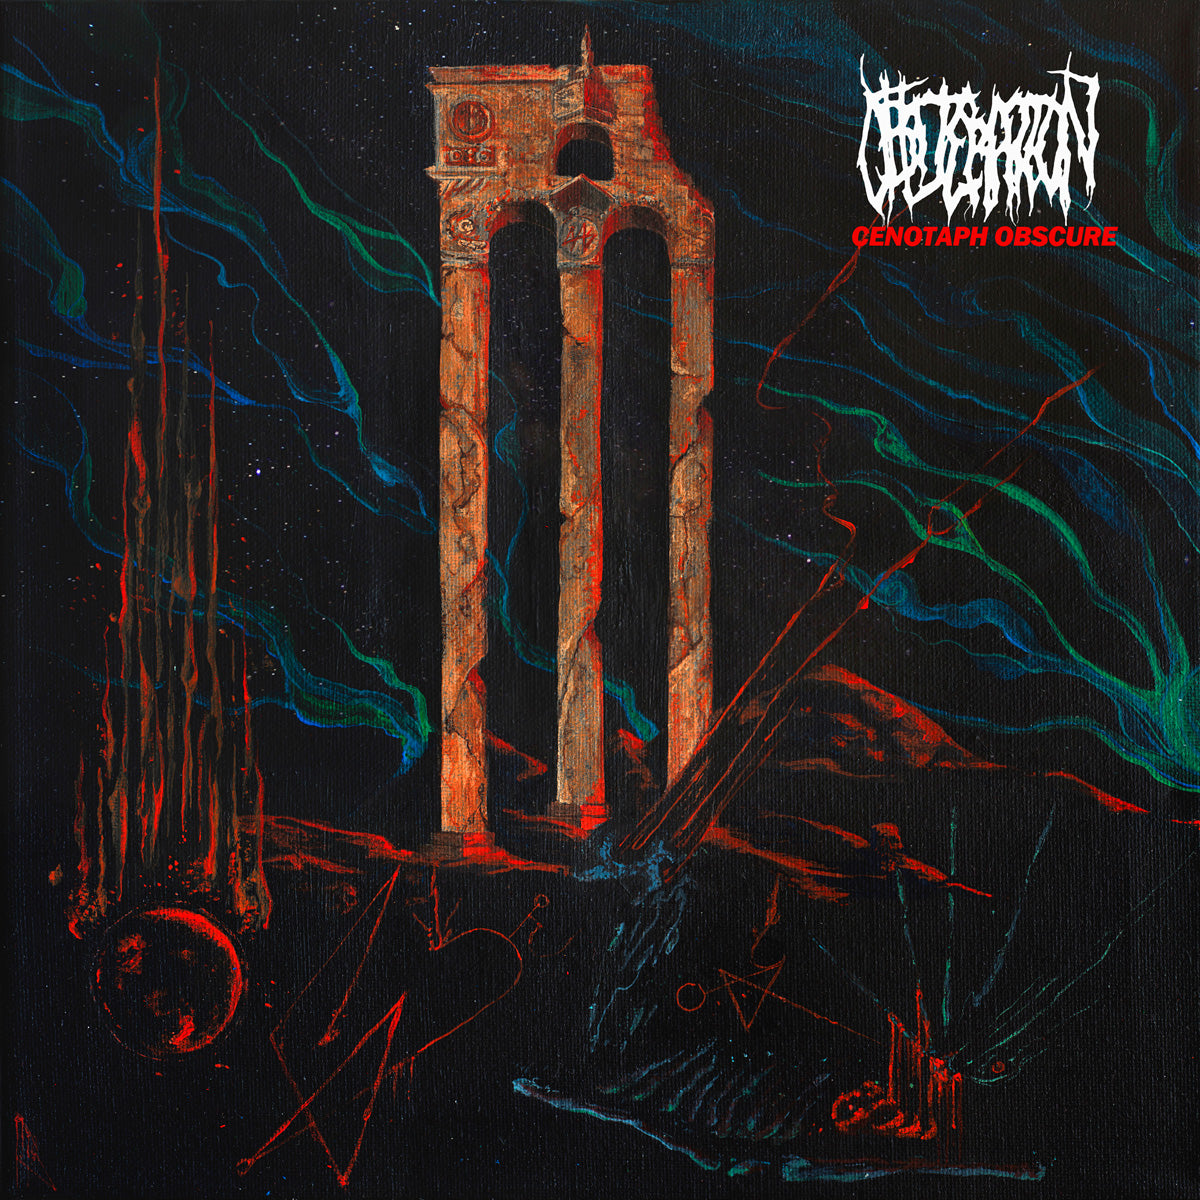 obliteration cenotaph obscure bandcamp